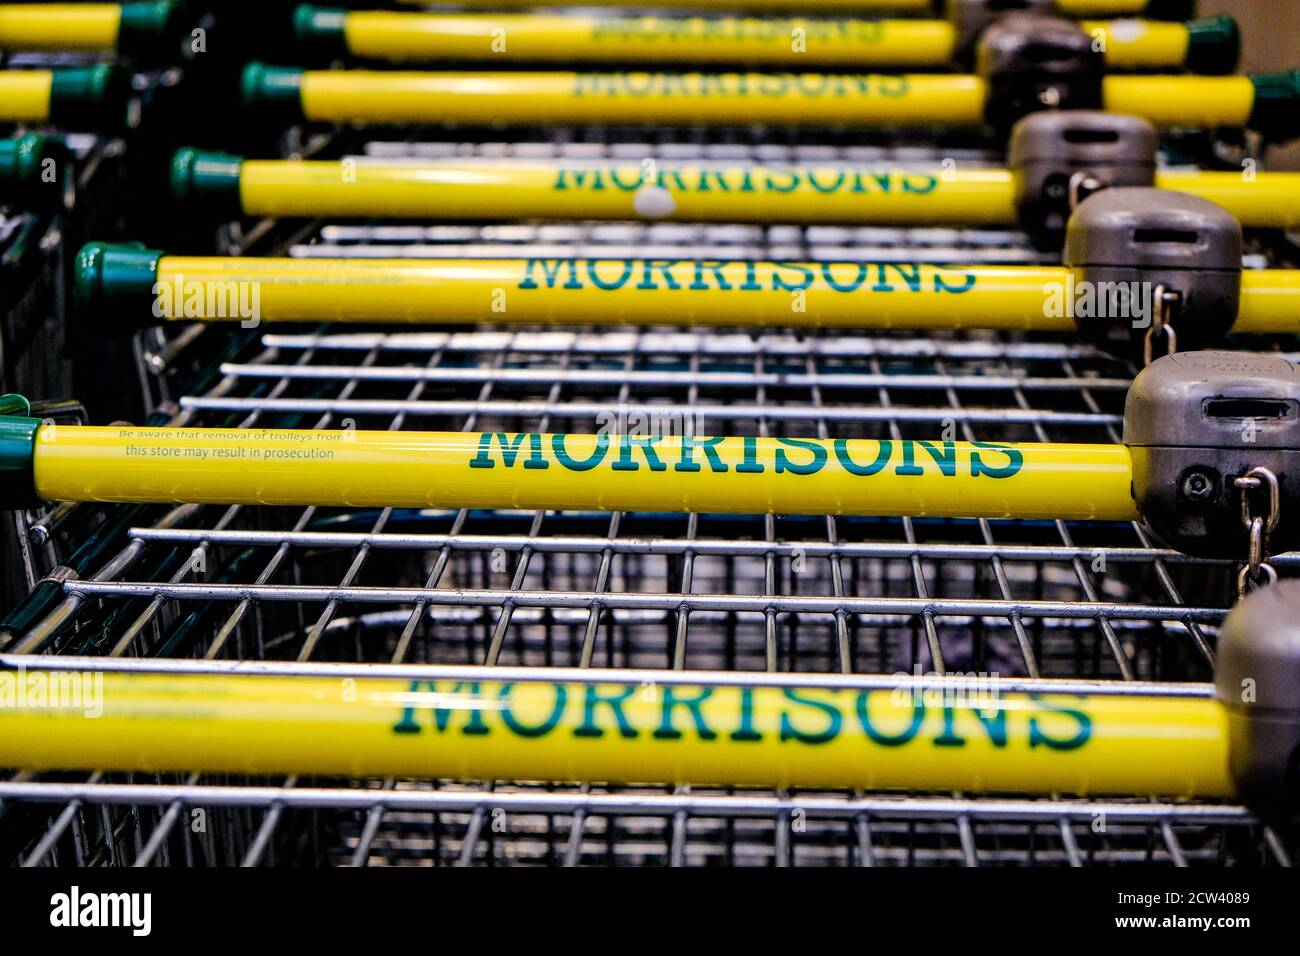 London UK, September 27 2020, Morrisons Supermarket Shopping Trolleys with No People Stock Photo